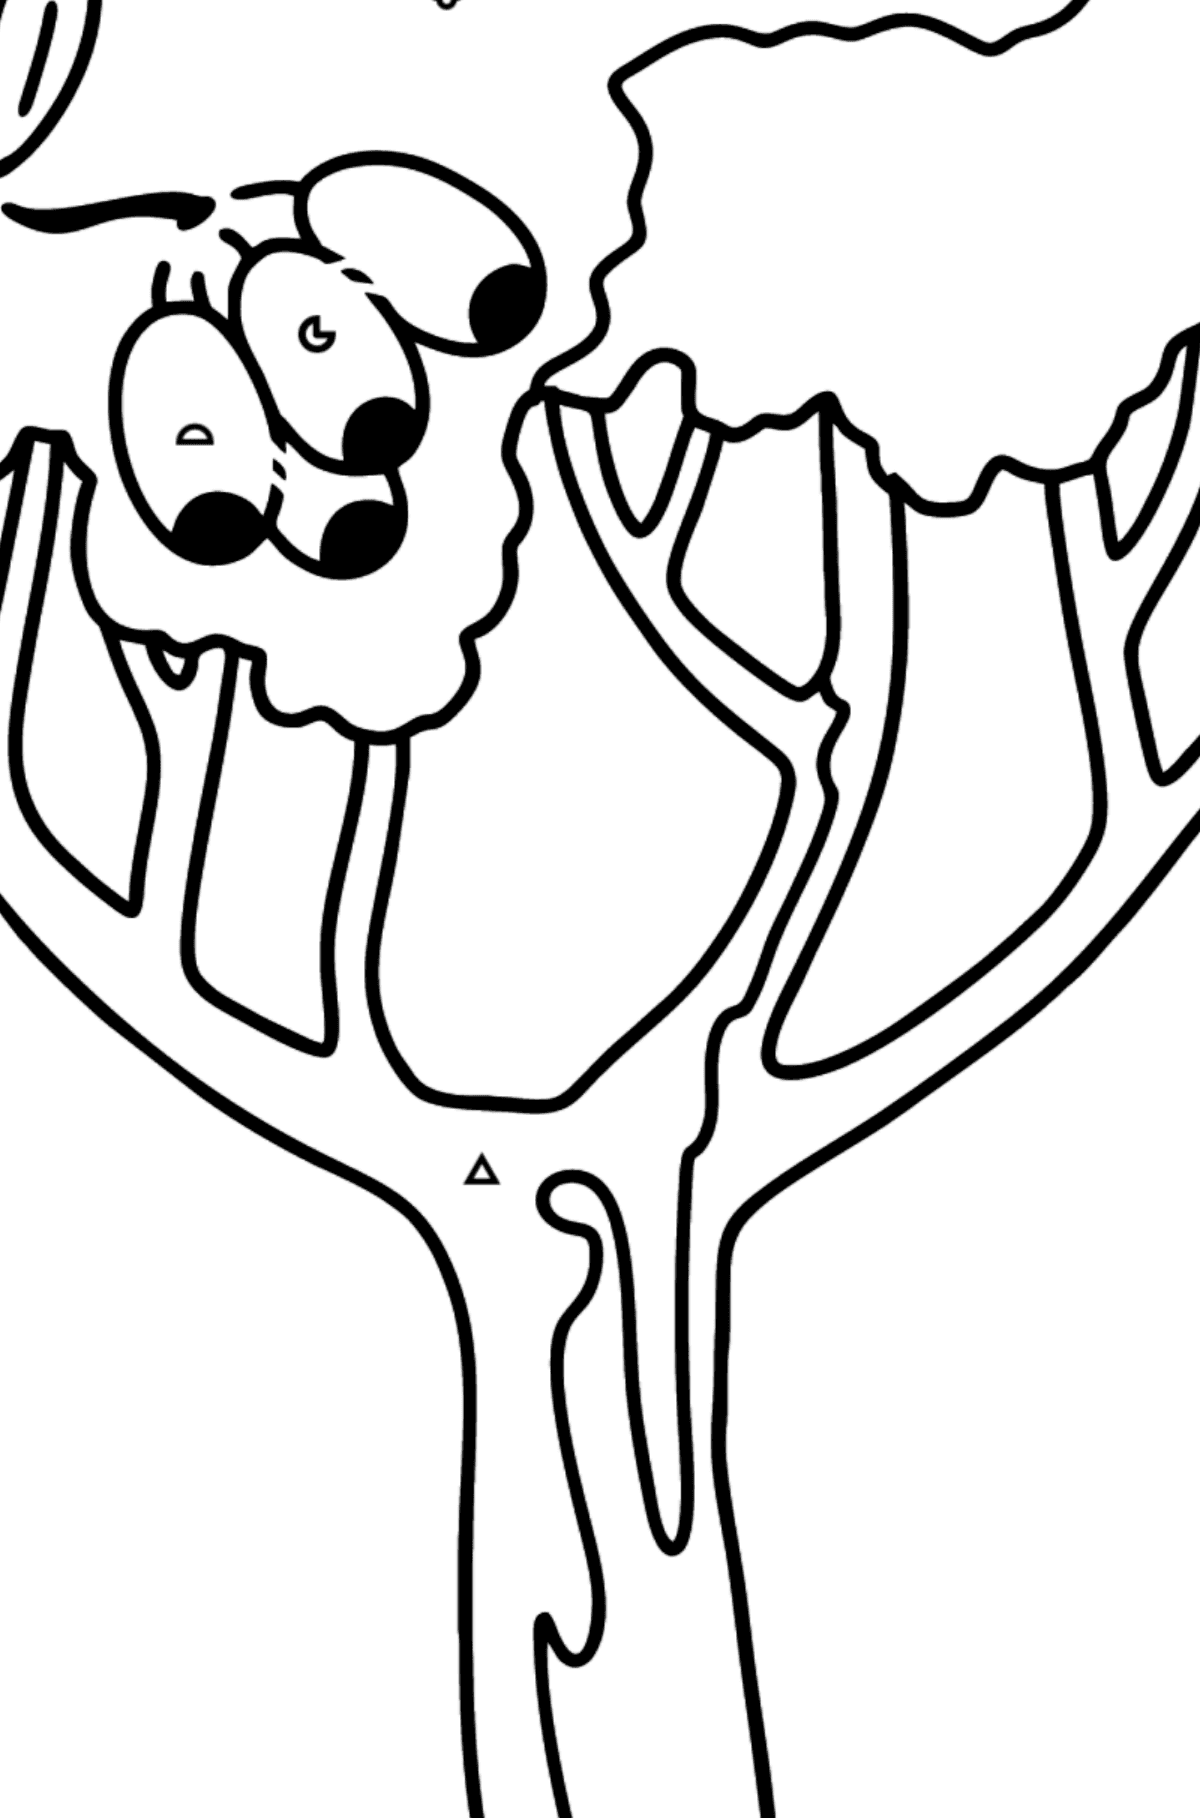 Gum tree - Corimbia coloring page - Coloring by Symbols and Geometric Shapes for Kids